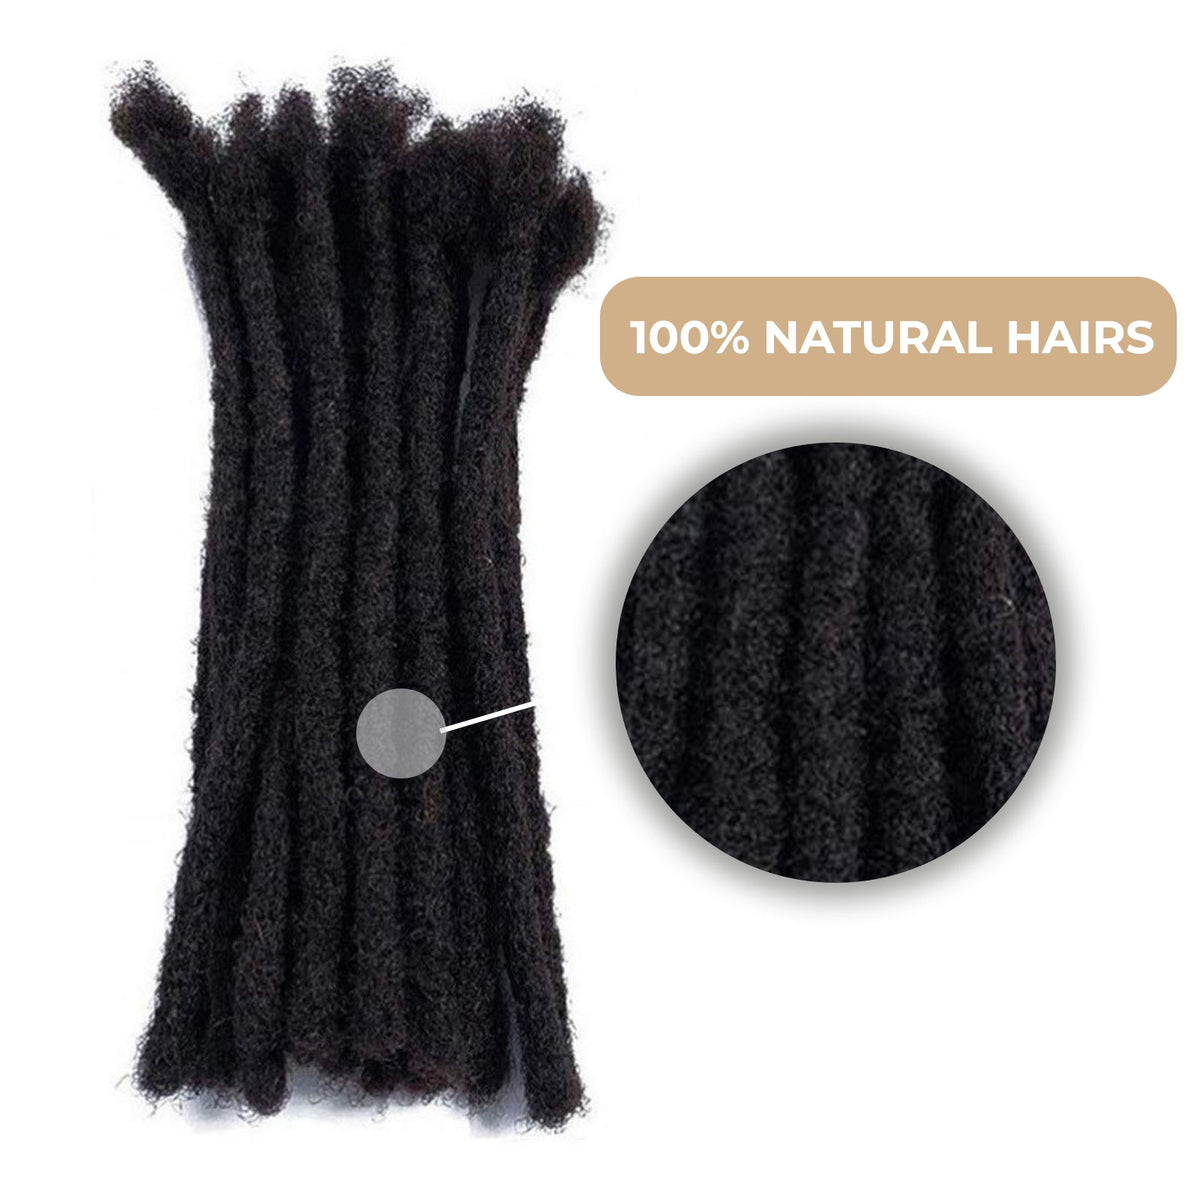 100% Human Hair Dreadlock Extensions 16Inch 10 Strands Handmade Natural Loc Extensions Human Hair Bundle Dreads Extensions For Woman&Men Can be Dyed & Bleached Natural Black 16inch length 0.8cm Width